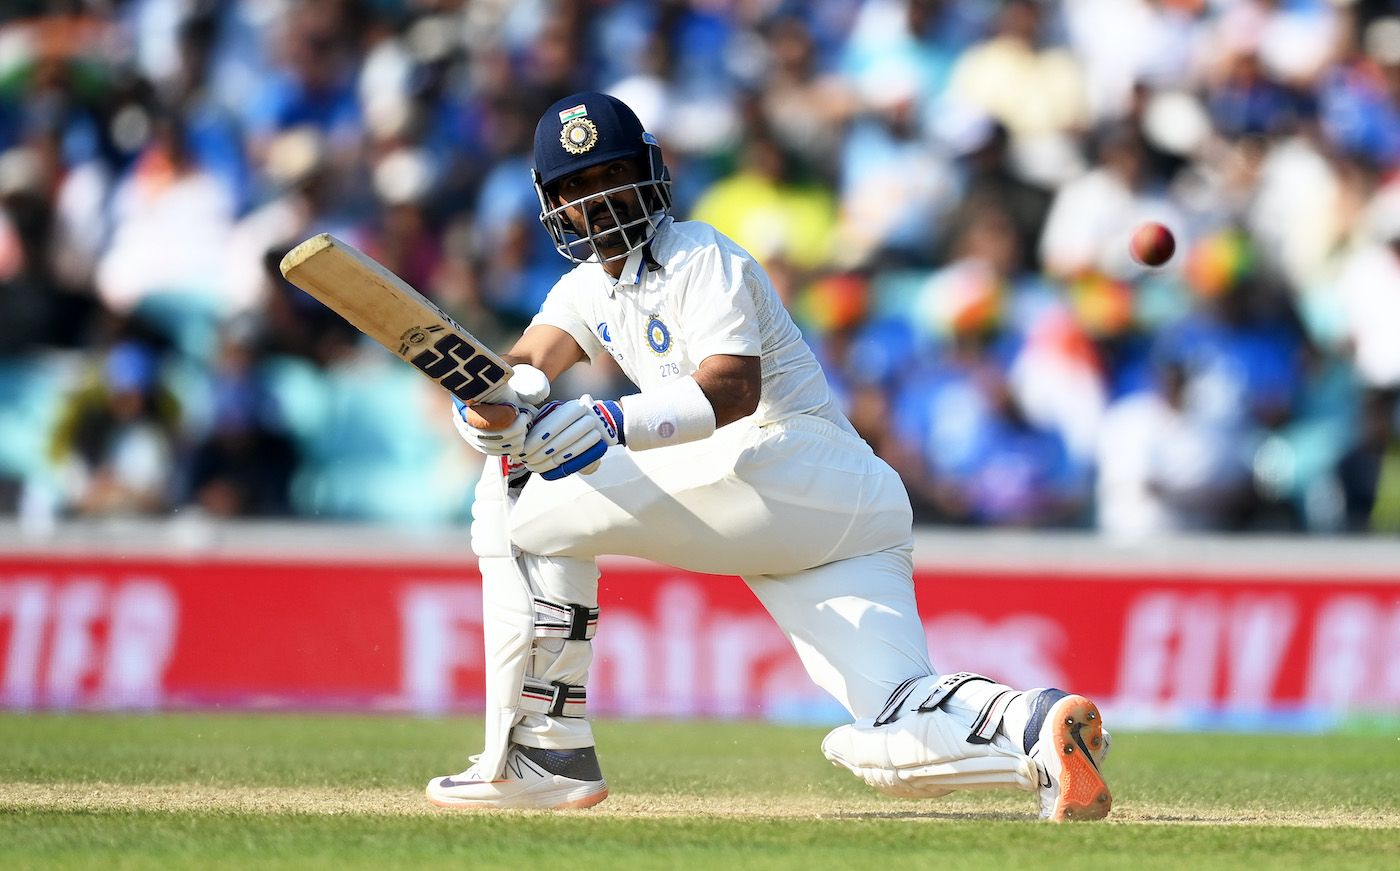 India batter Ajinkya Rahane pulls out of Leicestershire stint, plans to take a short break from cricket post thumbnail image